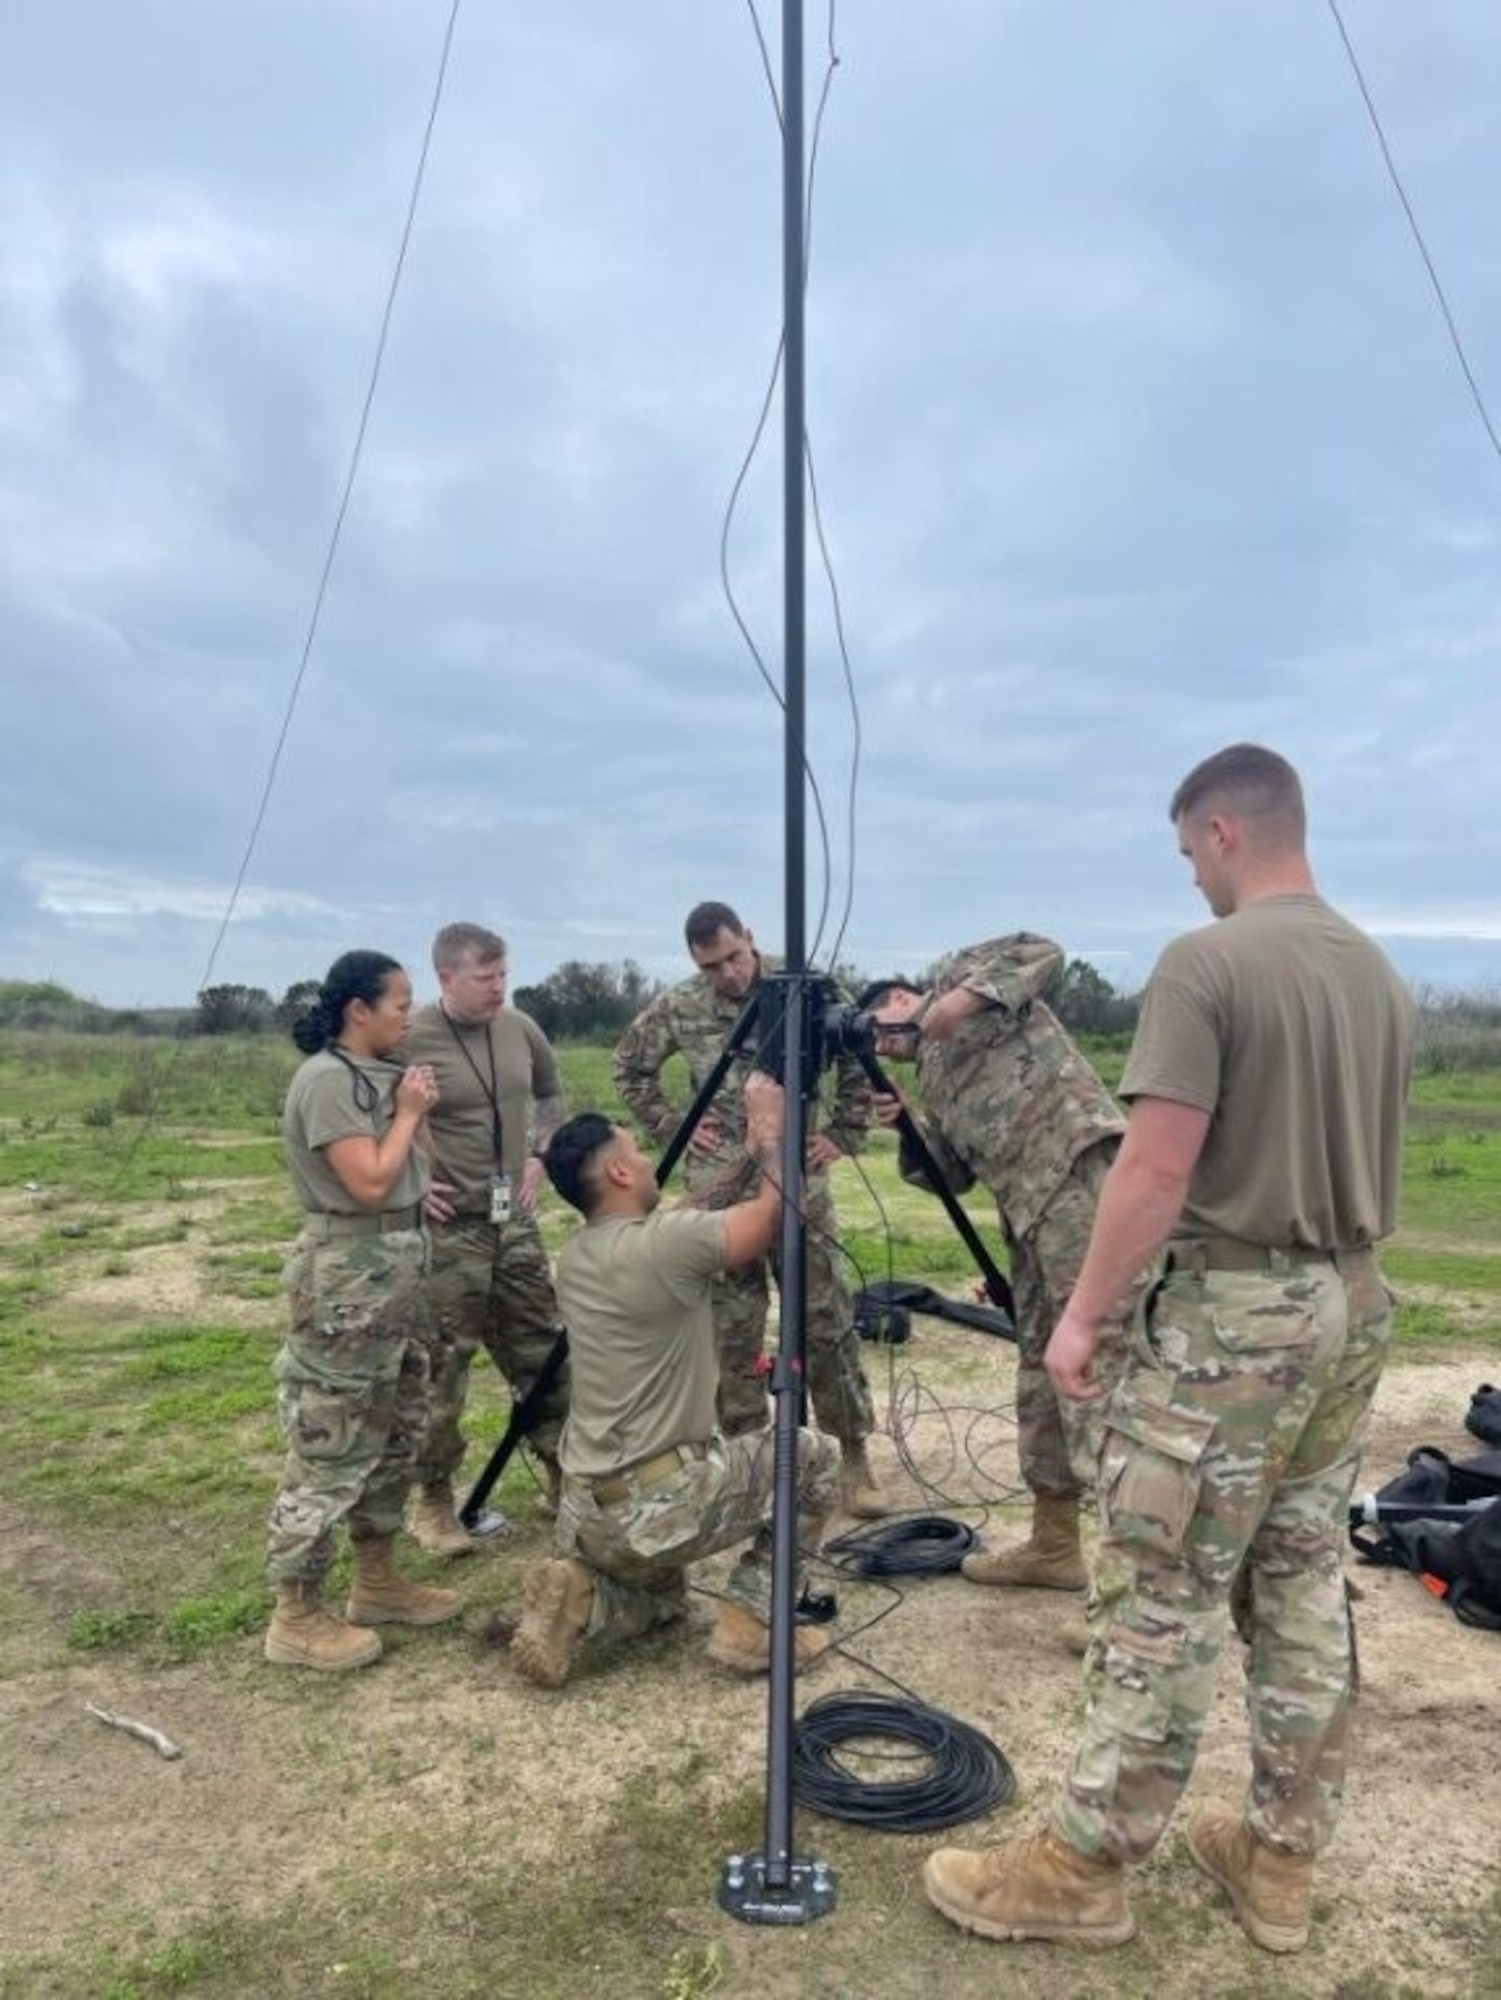 Airmen assigned to the 726th Air Control Squadron set up antennae to gain radio operations